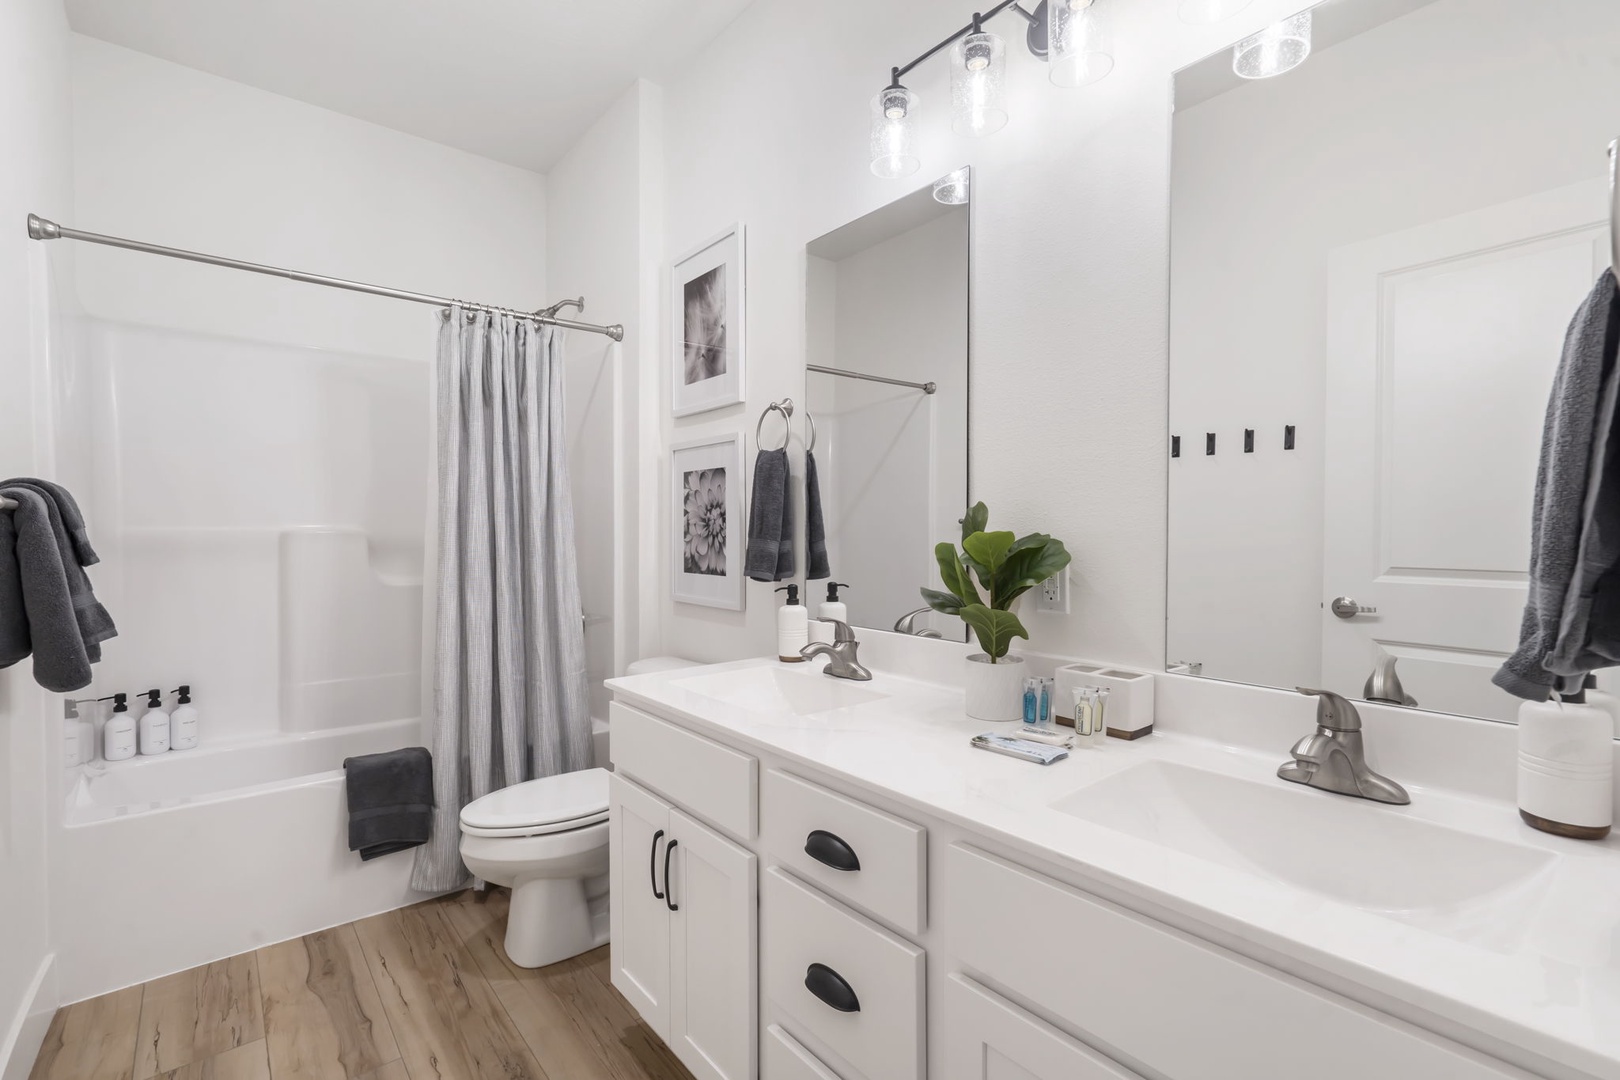 Enjoy a wide double vanity and shower/tub combo in the shared bathroom